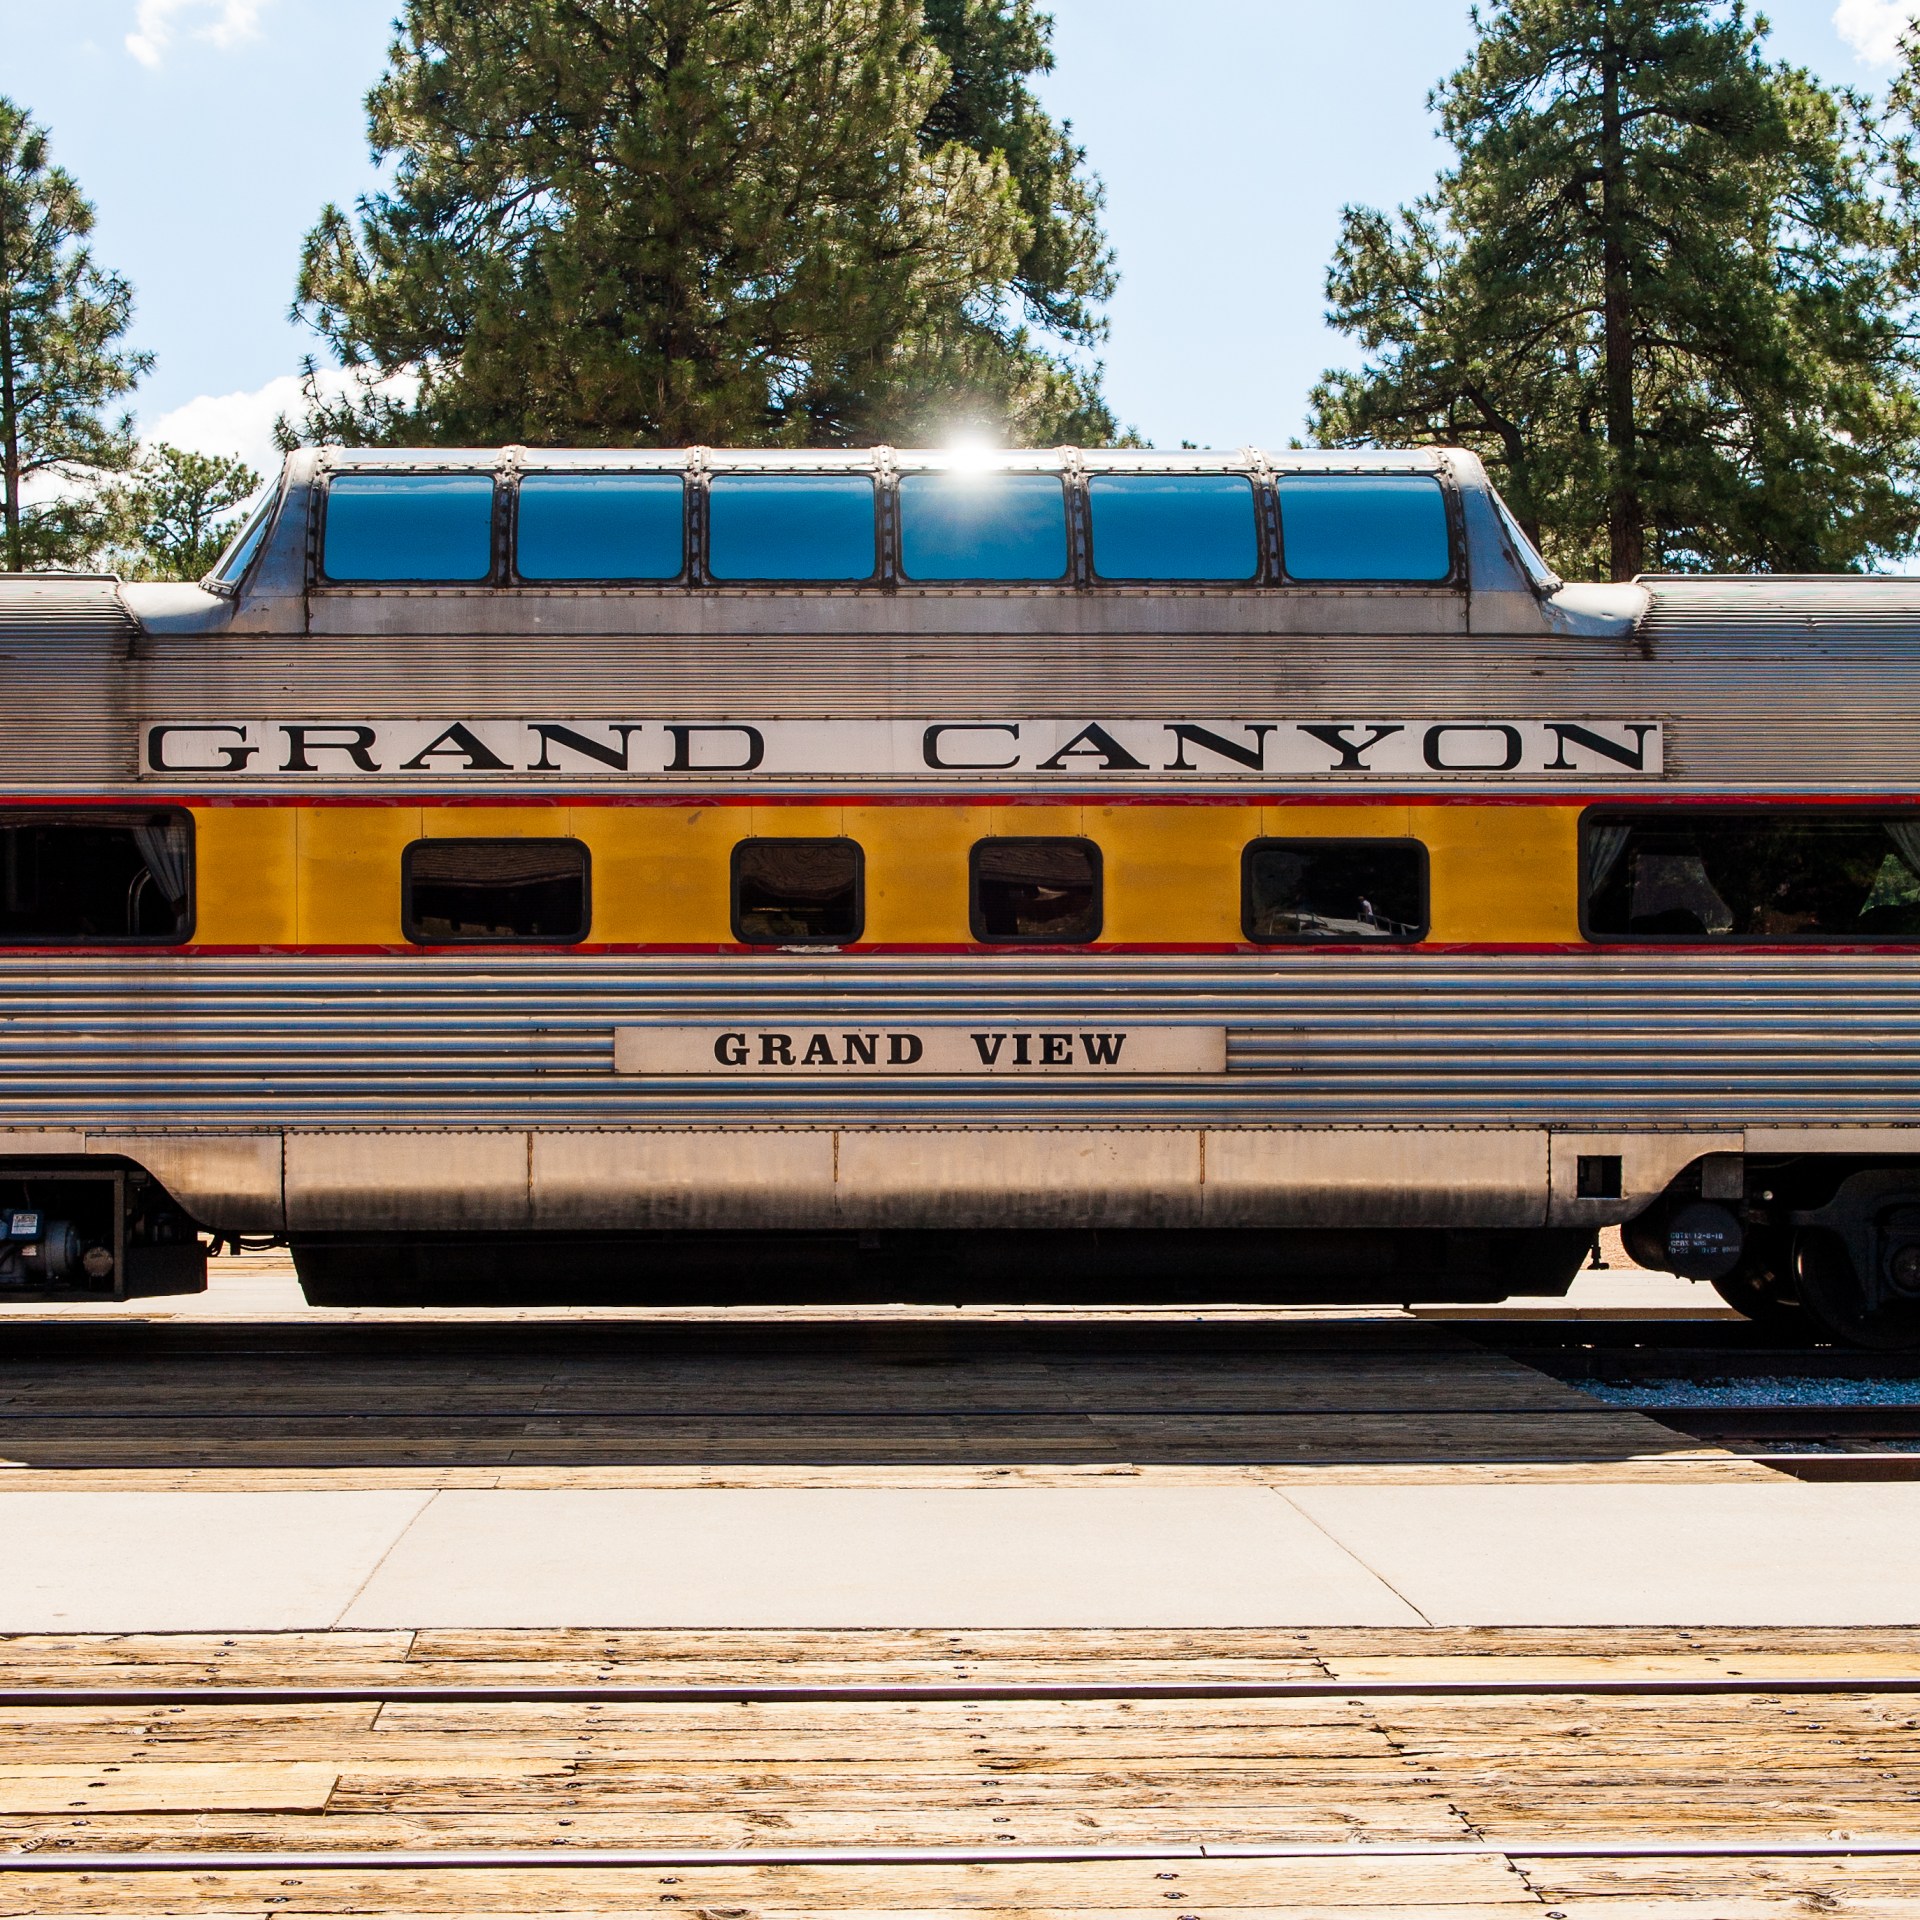 View Of Train In Gran Canyon National Park Railway Station